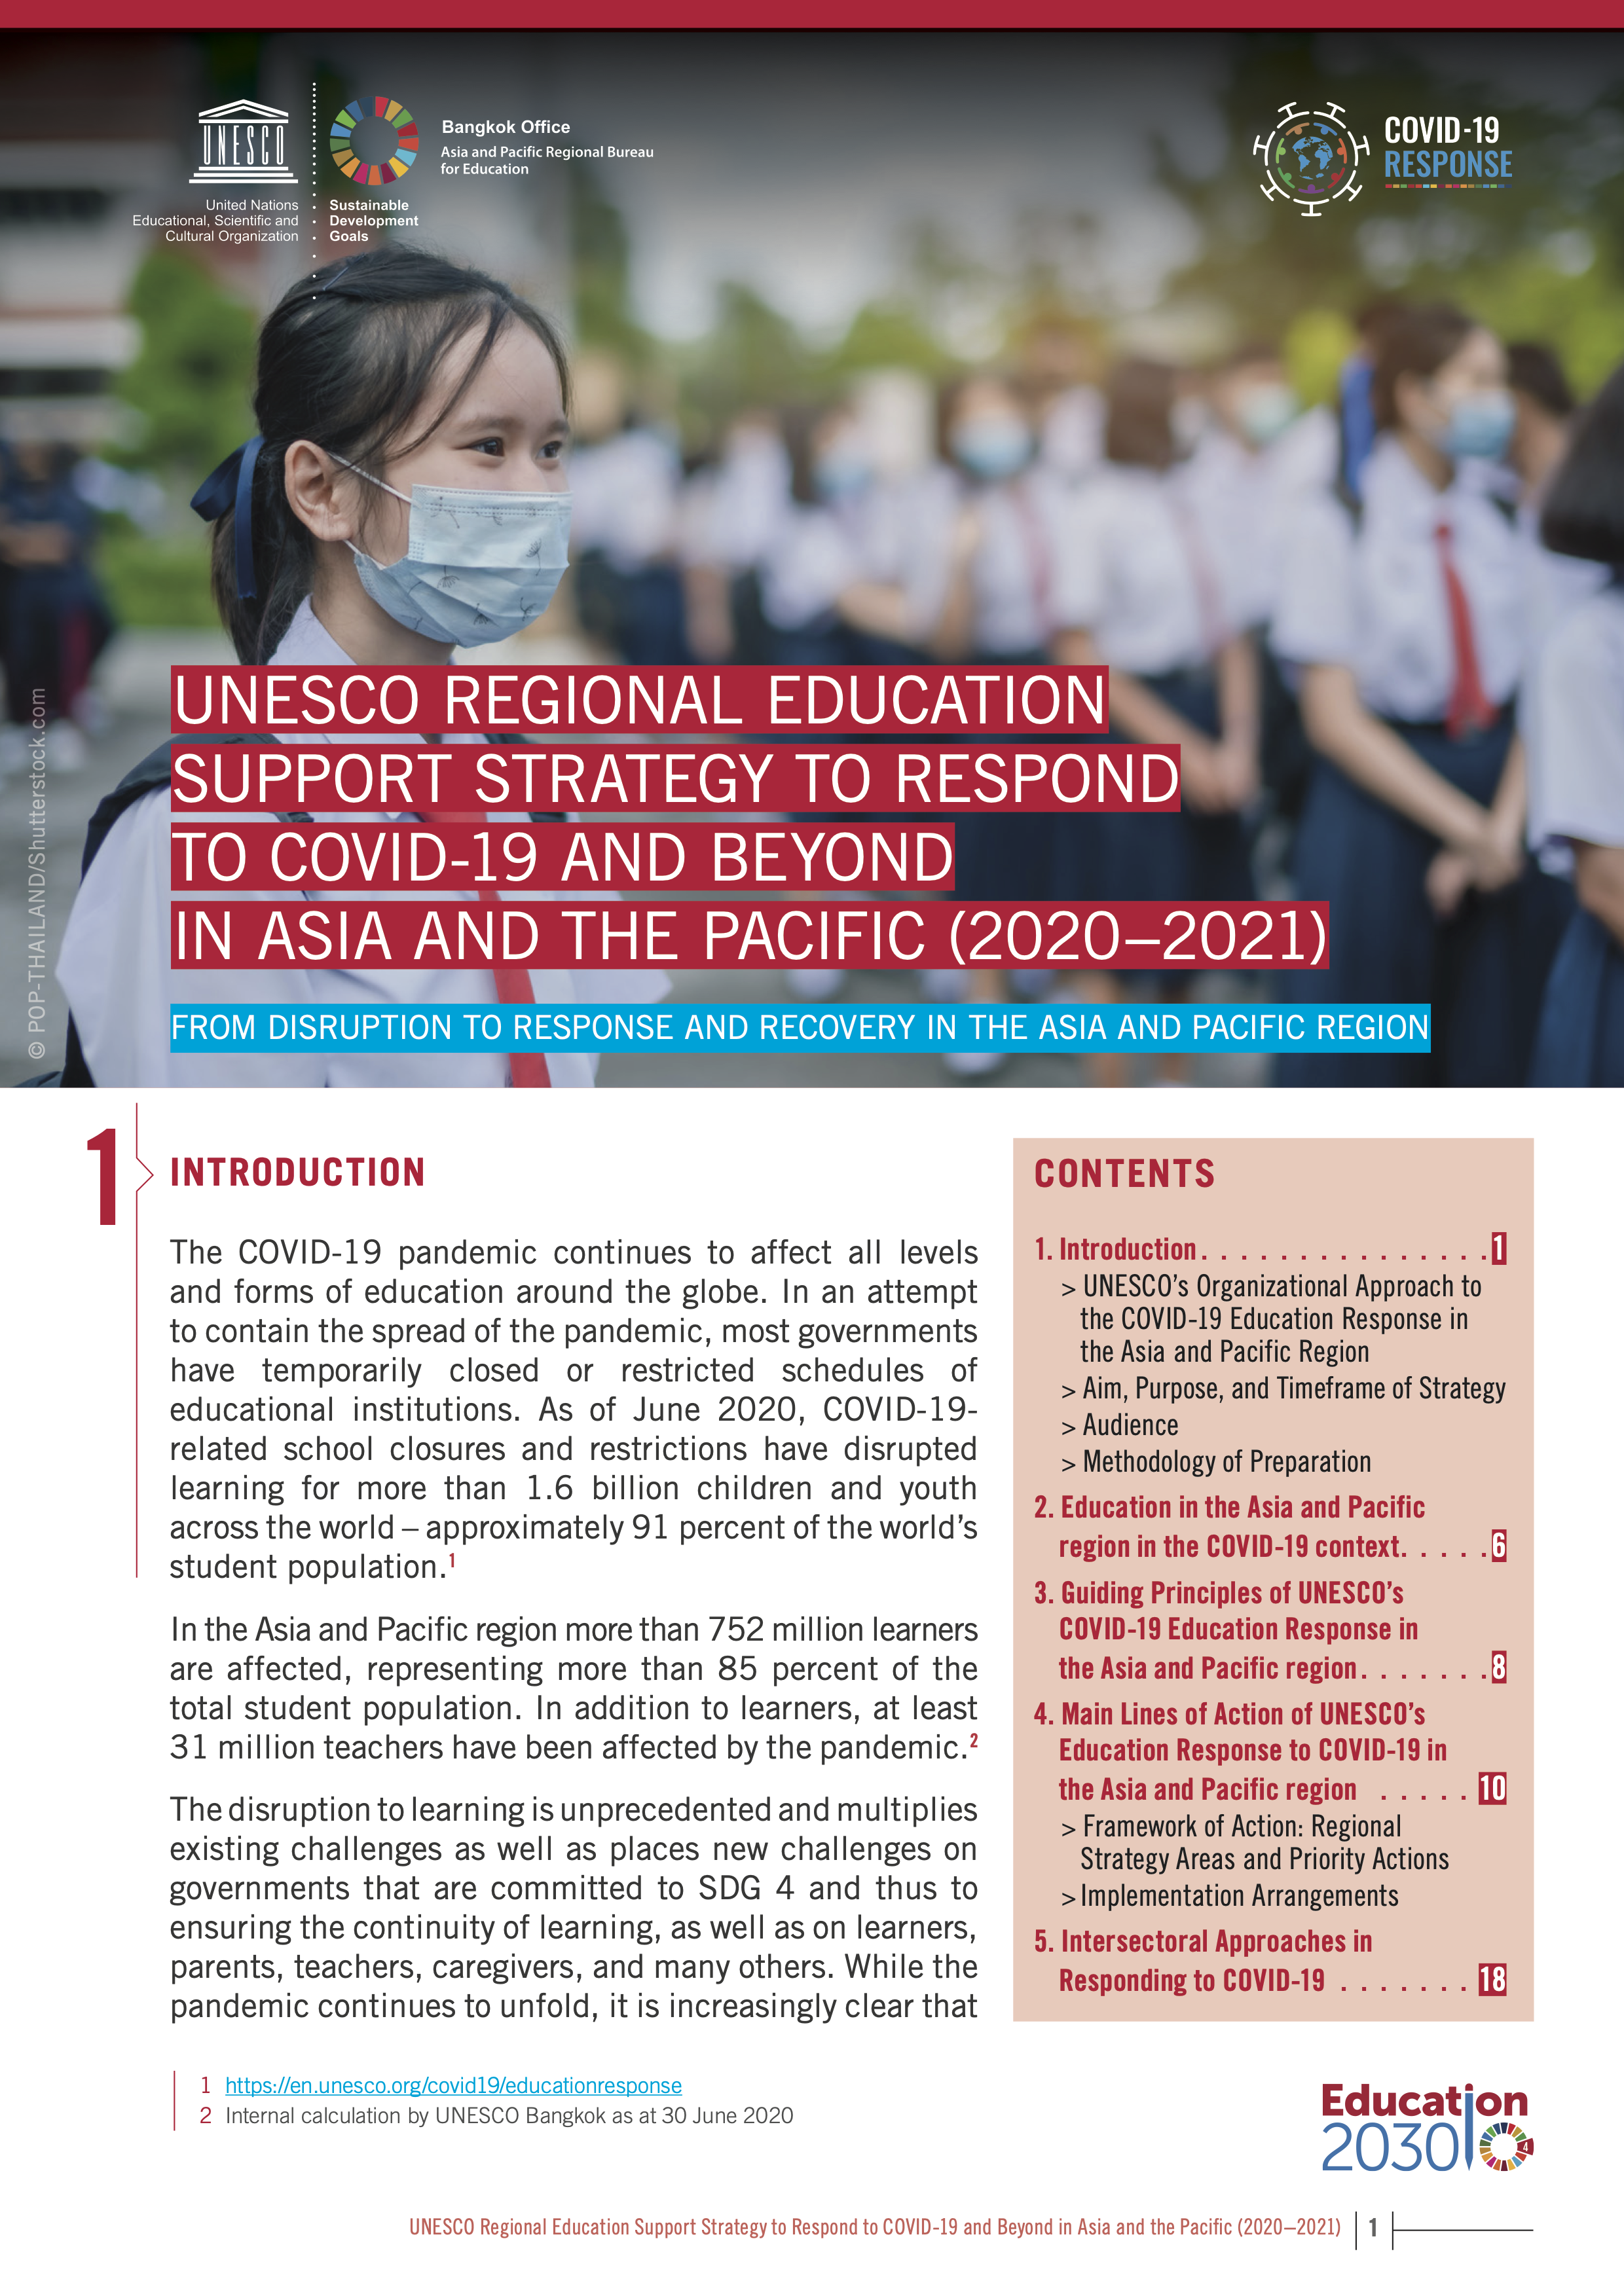 UNESCO Regional Education Support Strategy to Respond to COVID-19 and Beyond in Asia and the Pacific